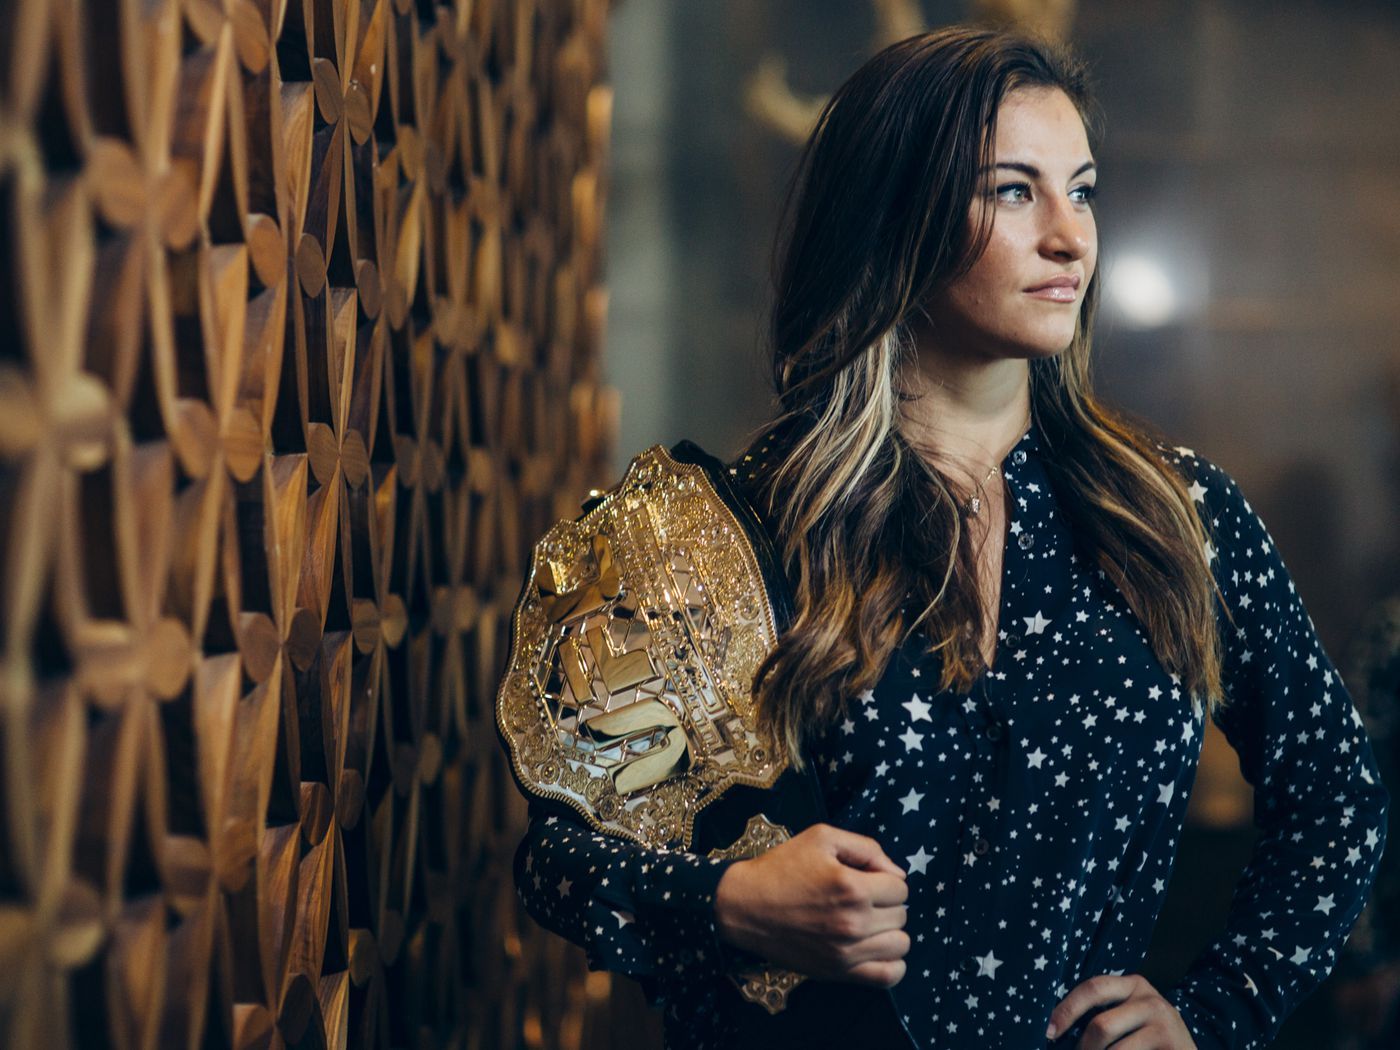 Morning Report: Miesha Tate's comeback goal is to win UFC title: 'Obviously, I want to become a champion again'